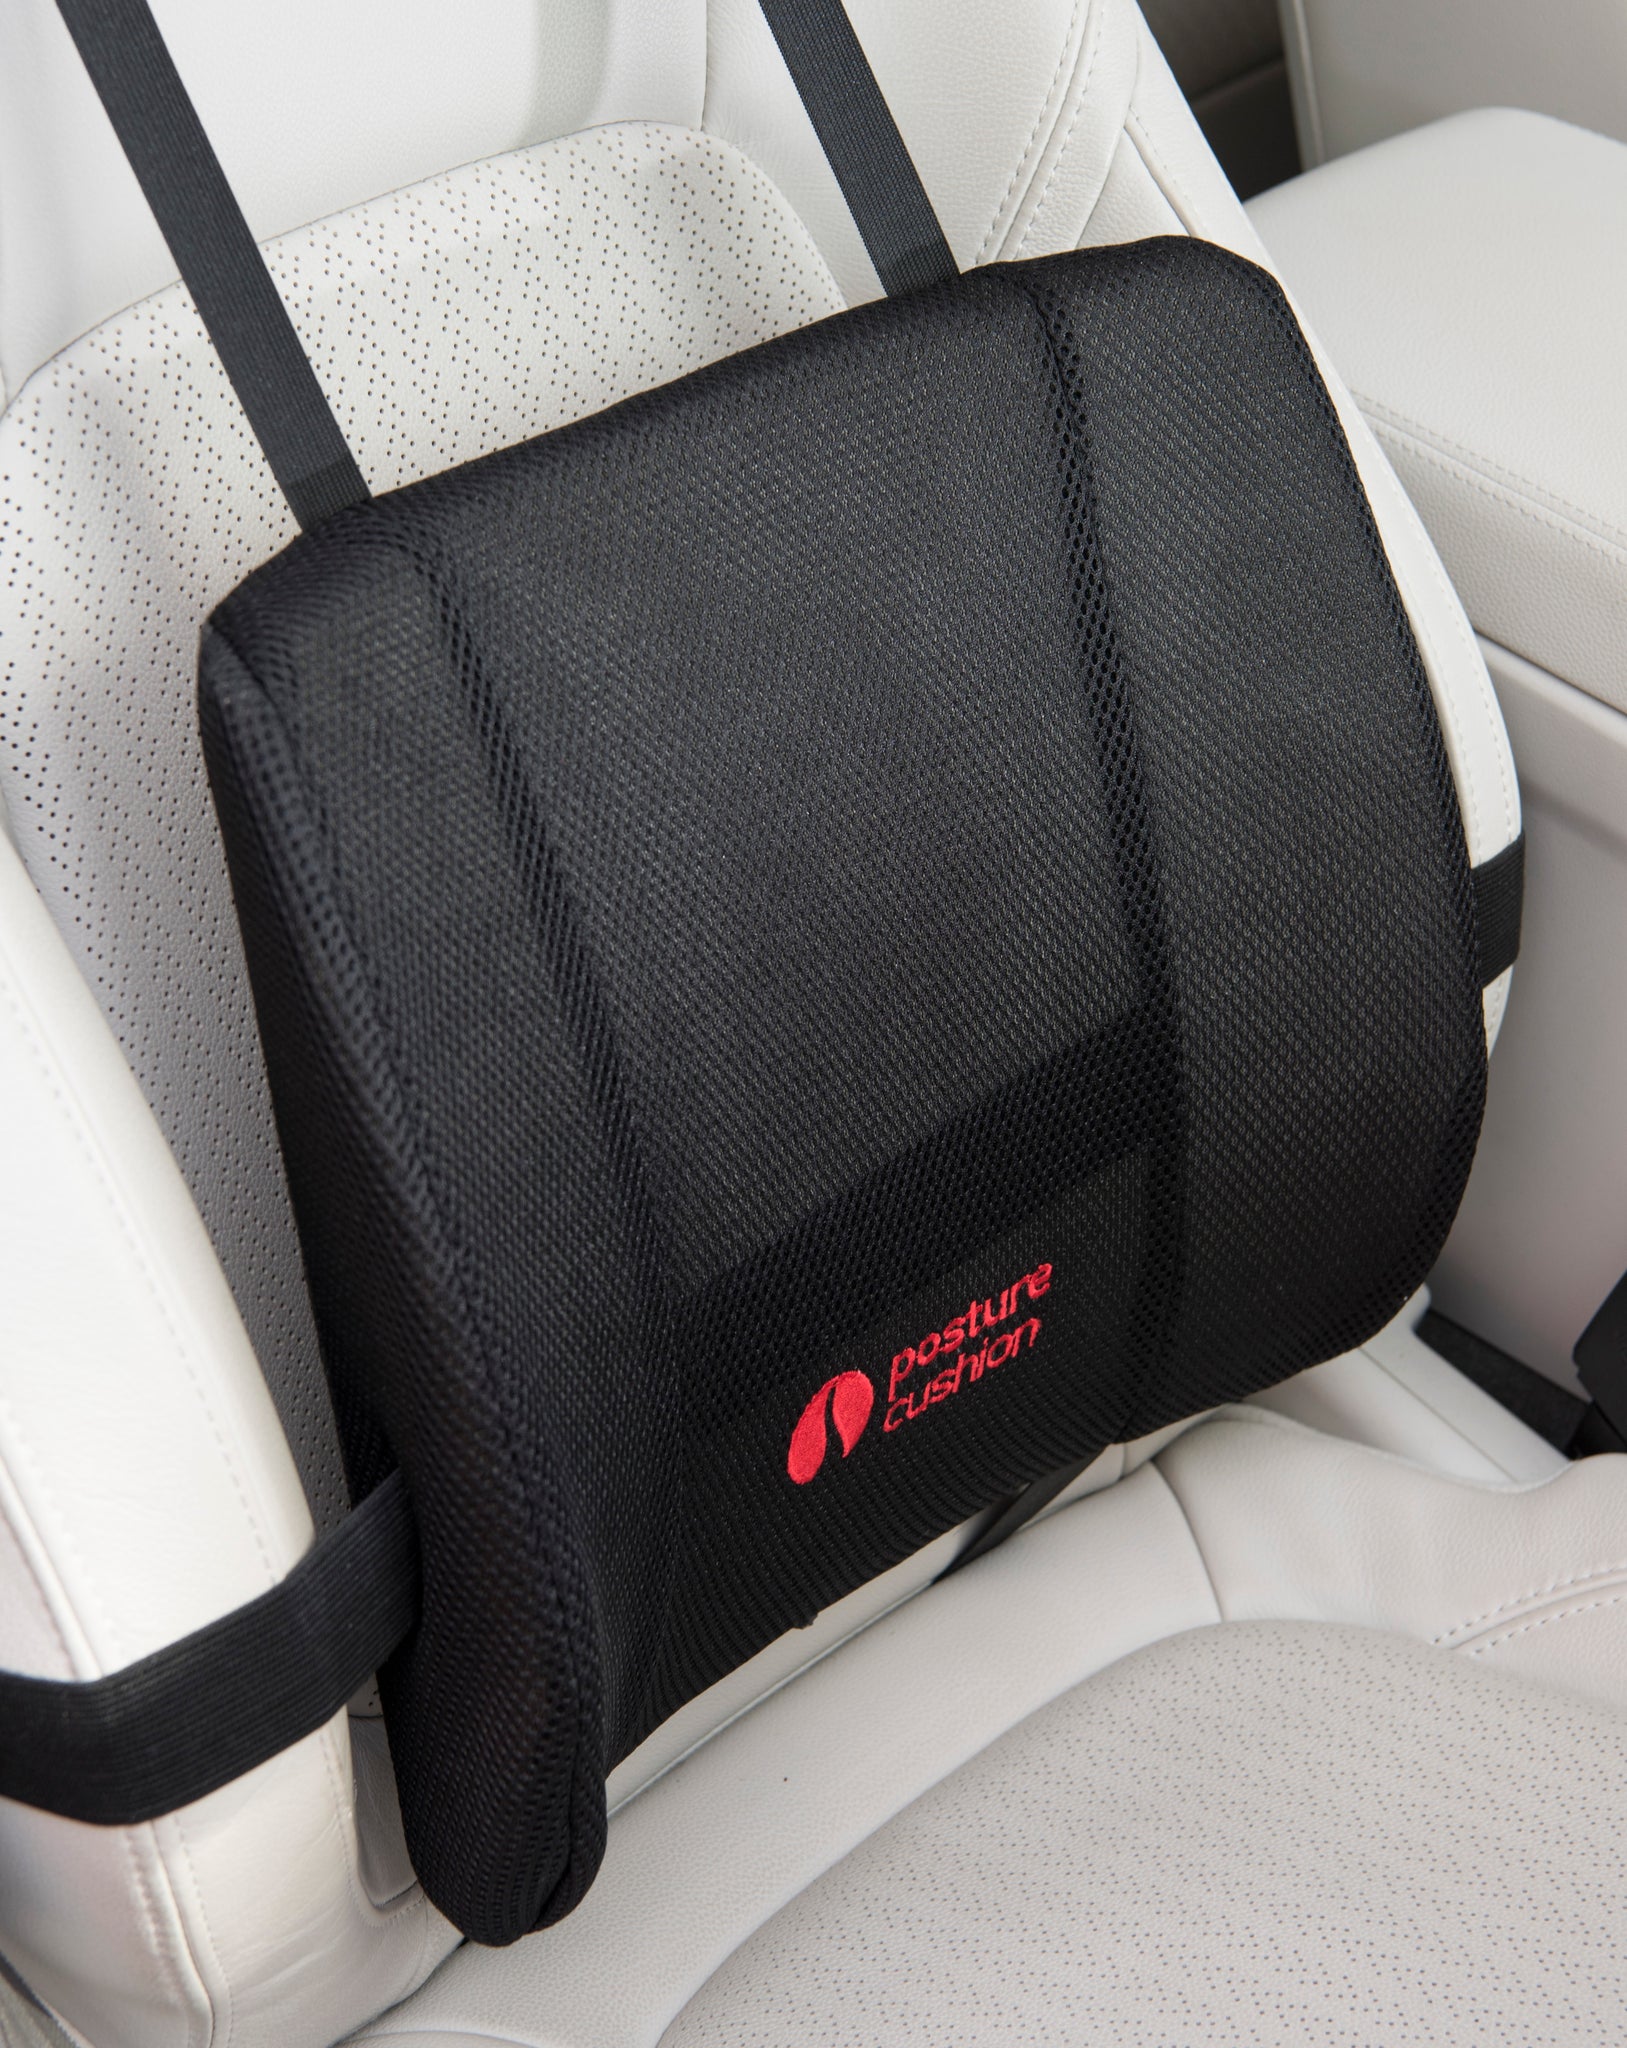 What is lumbar support in a car?